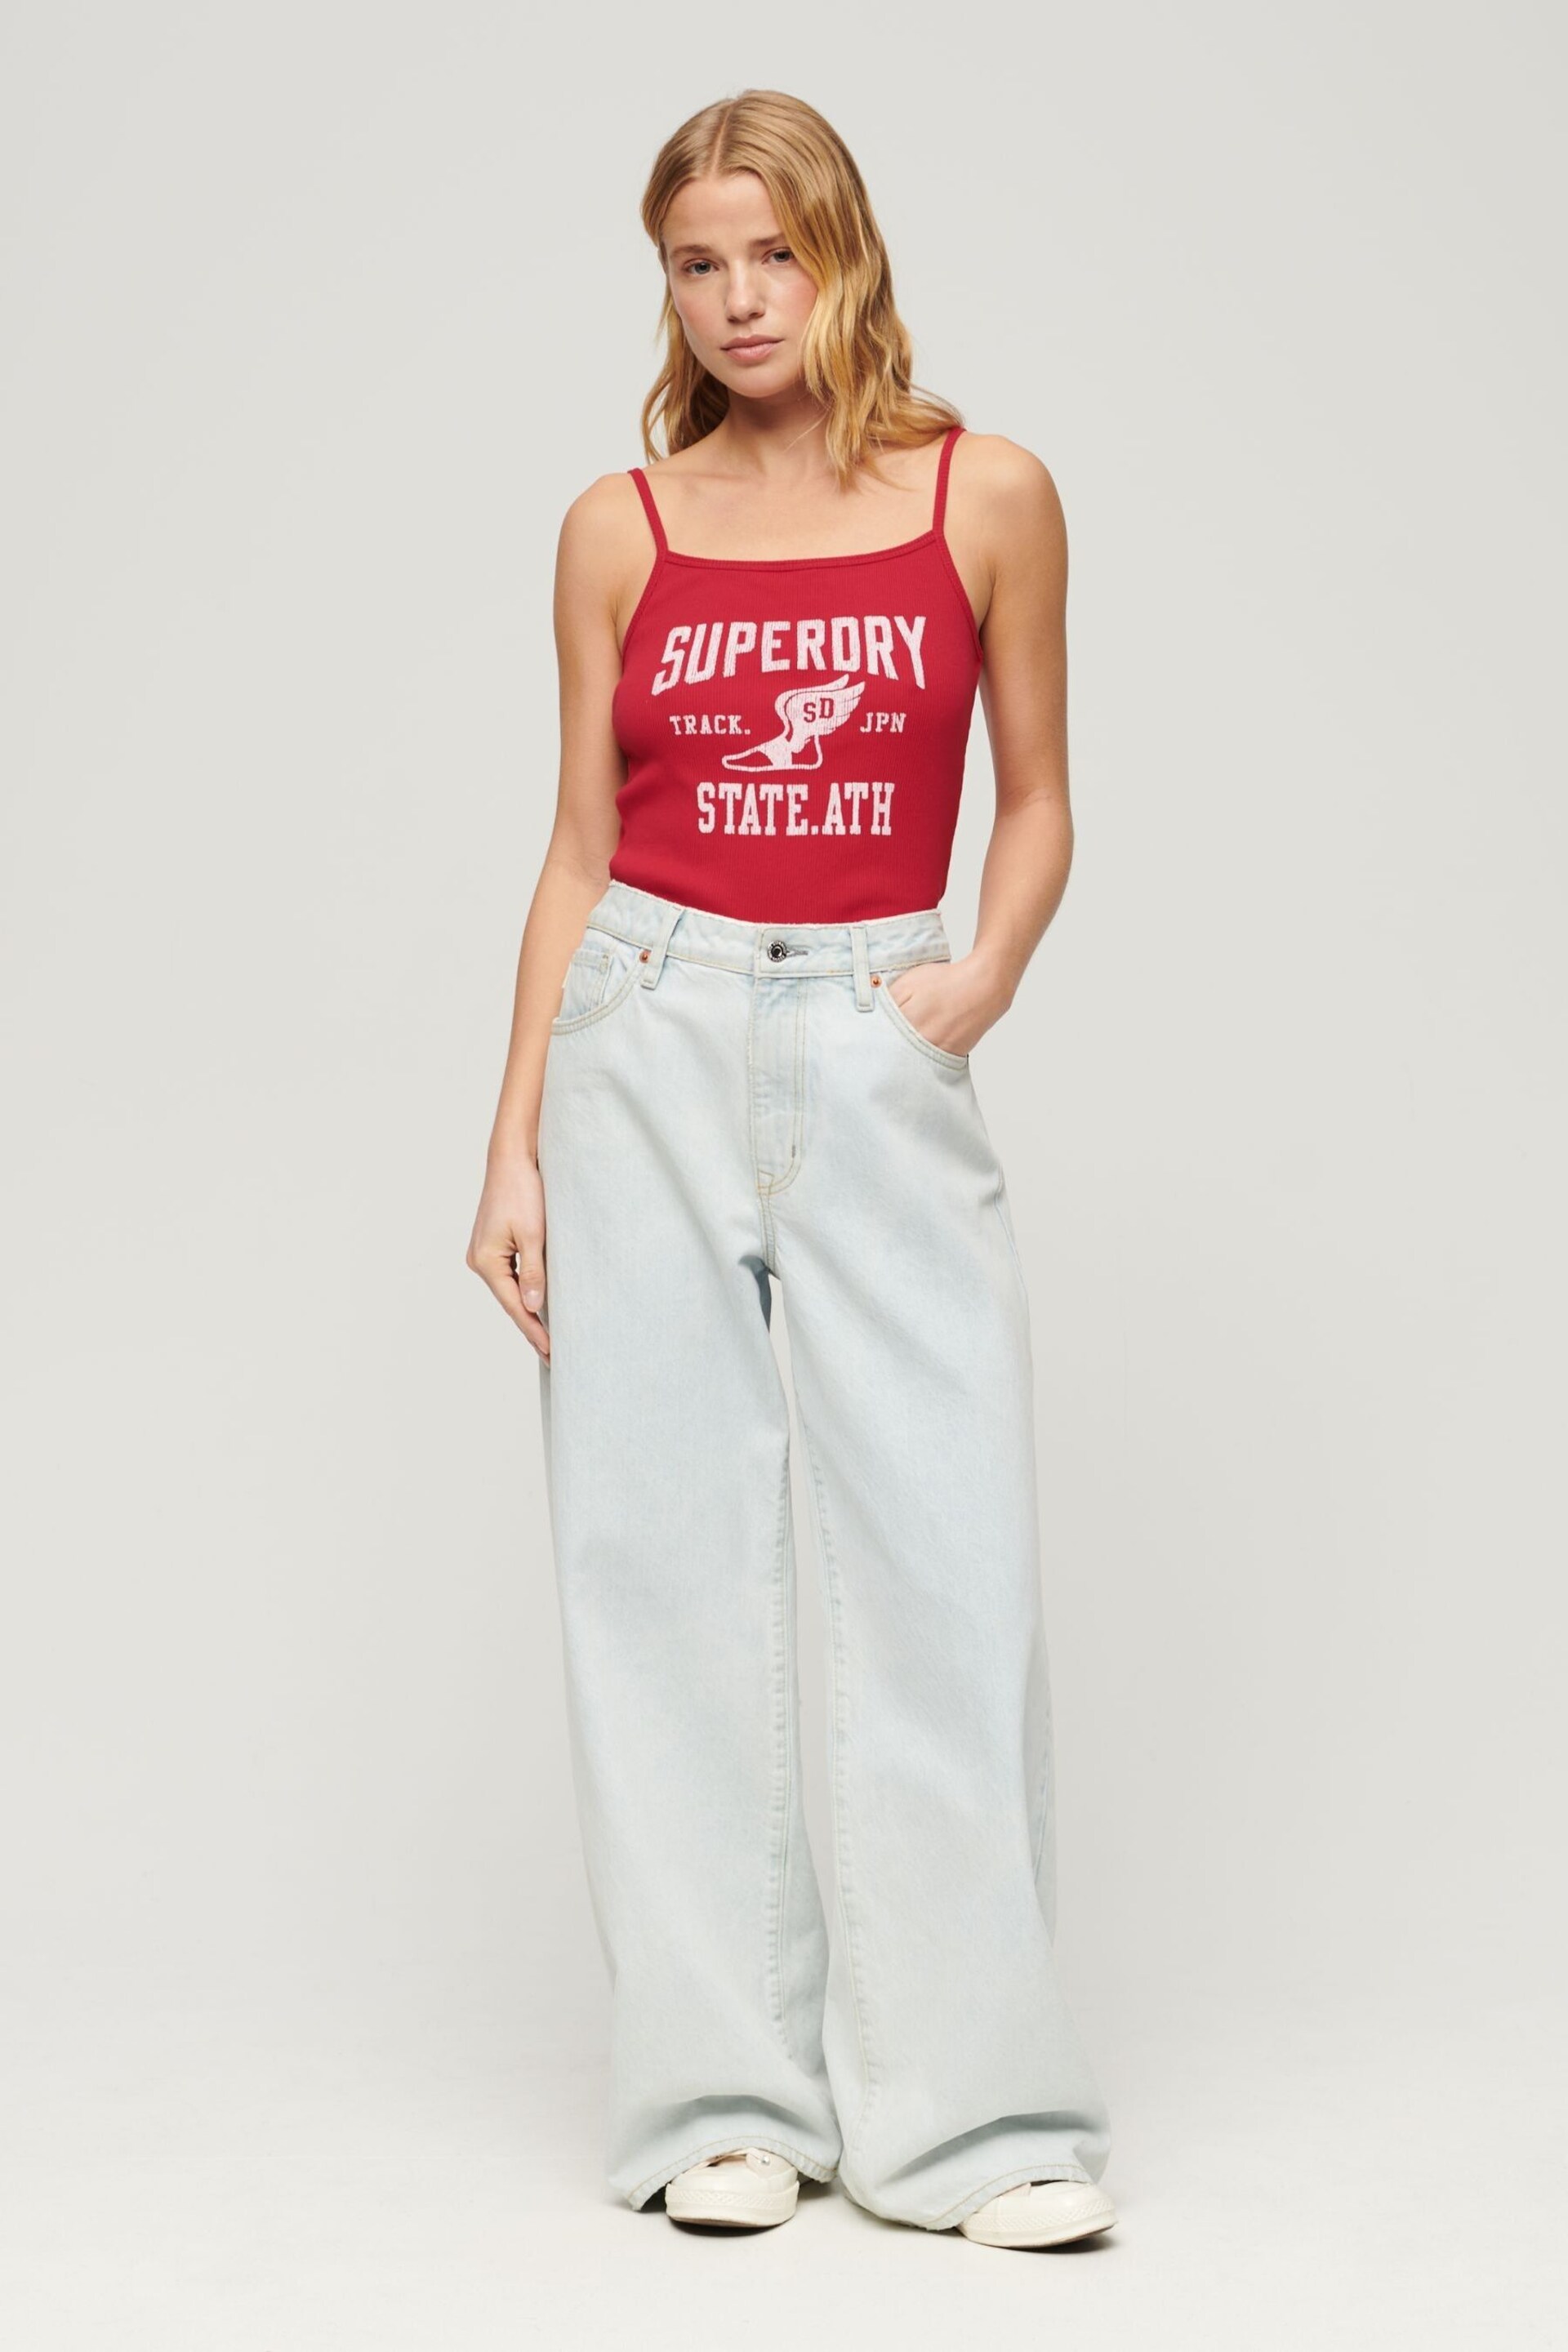 Superdry Red Athletic College Graphic Rib Cami Top - Image 3 of 6